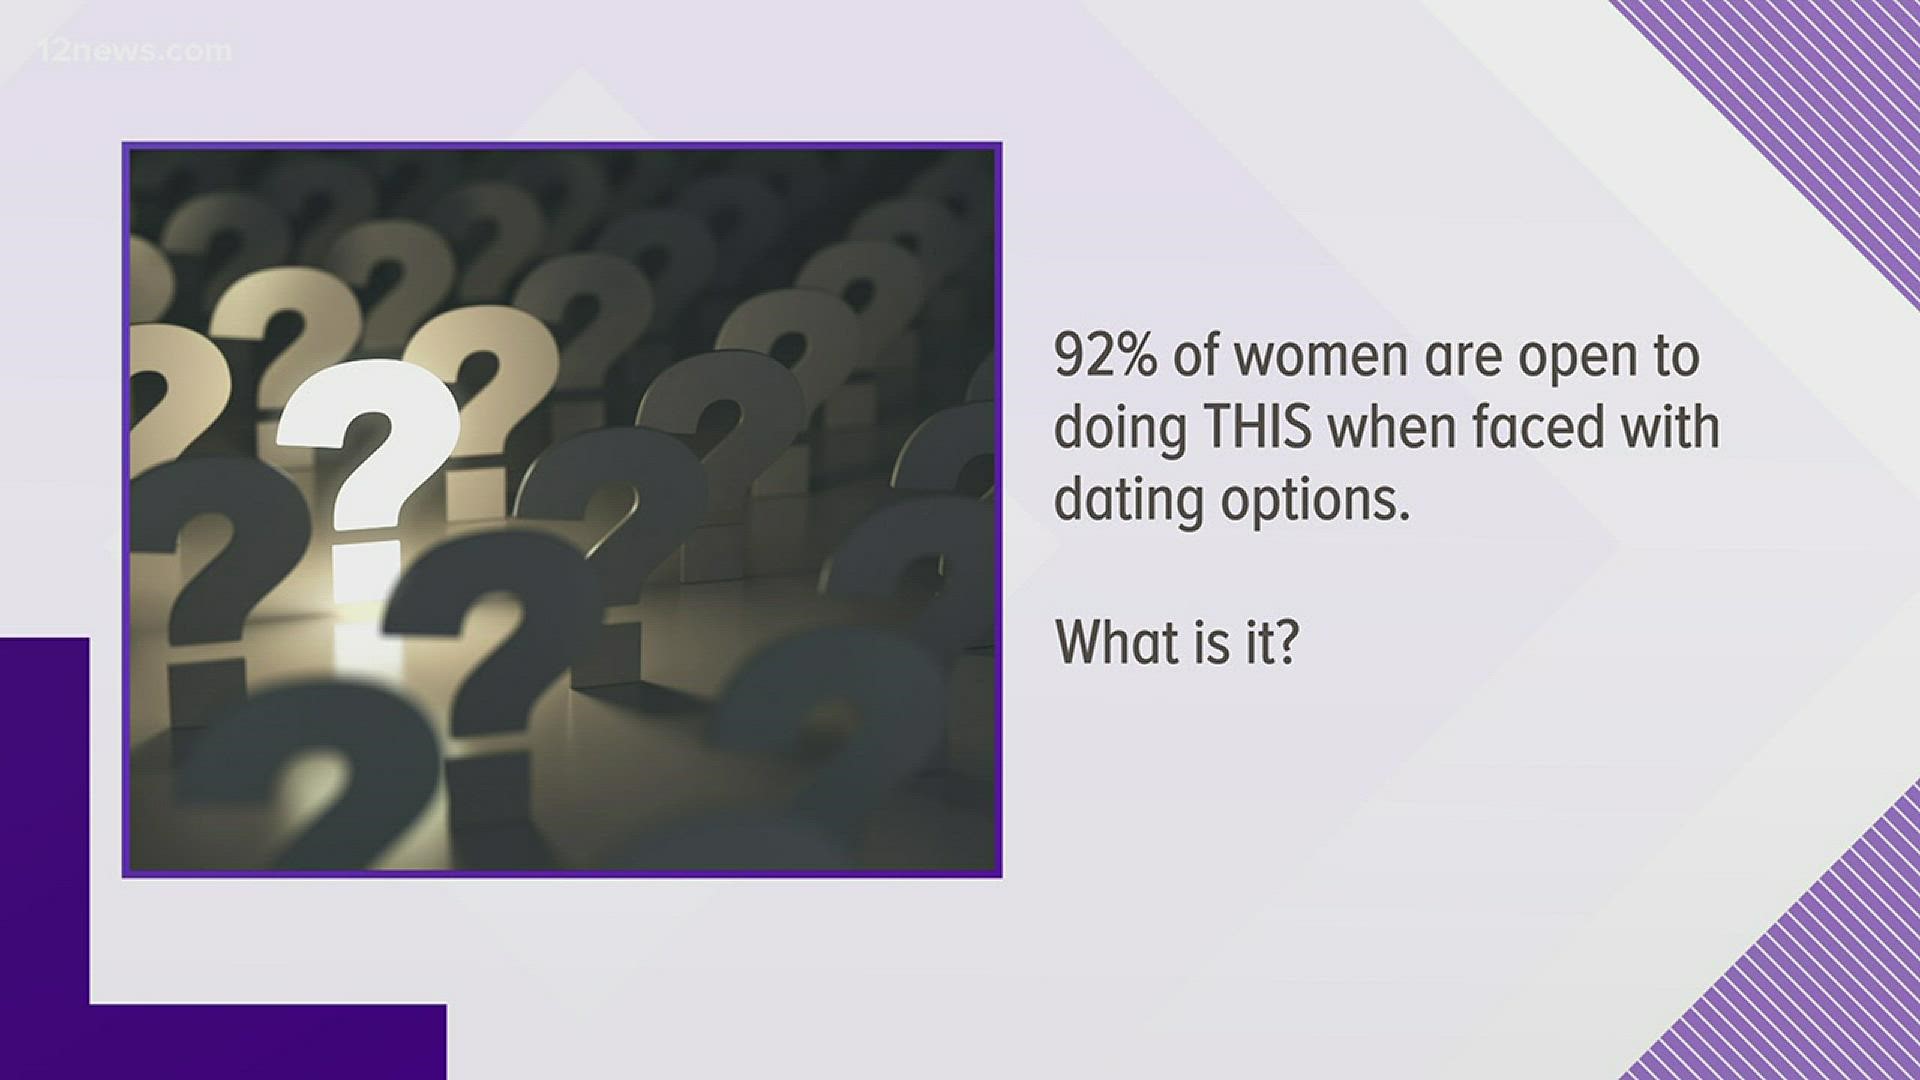 92% would be open to doing what while dating?